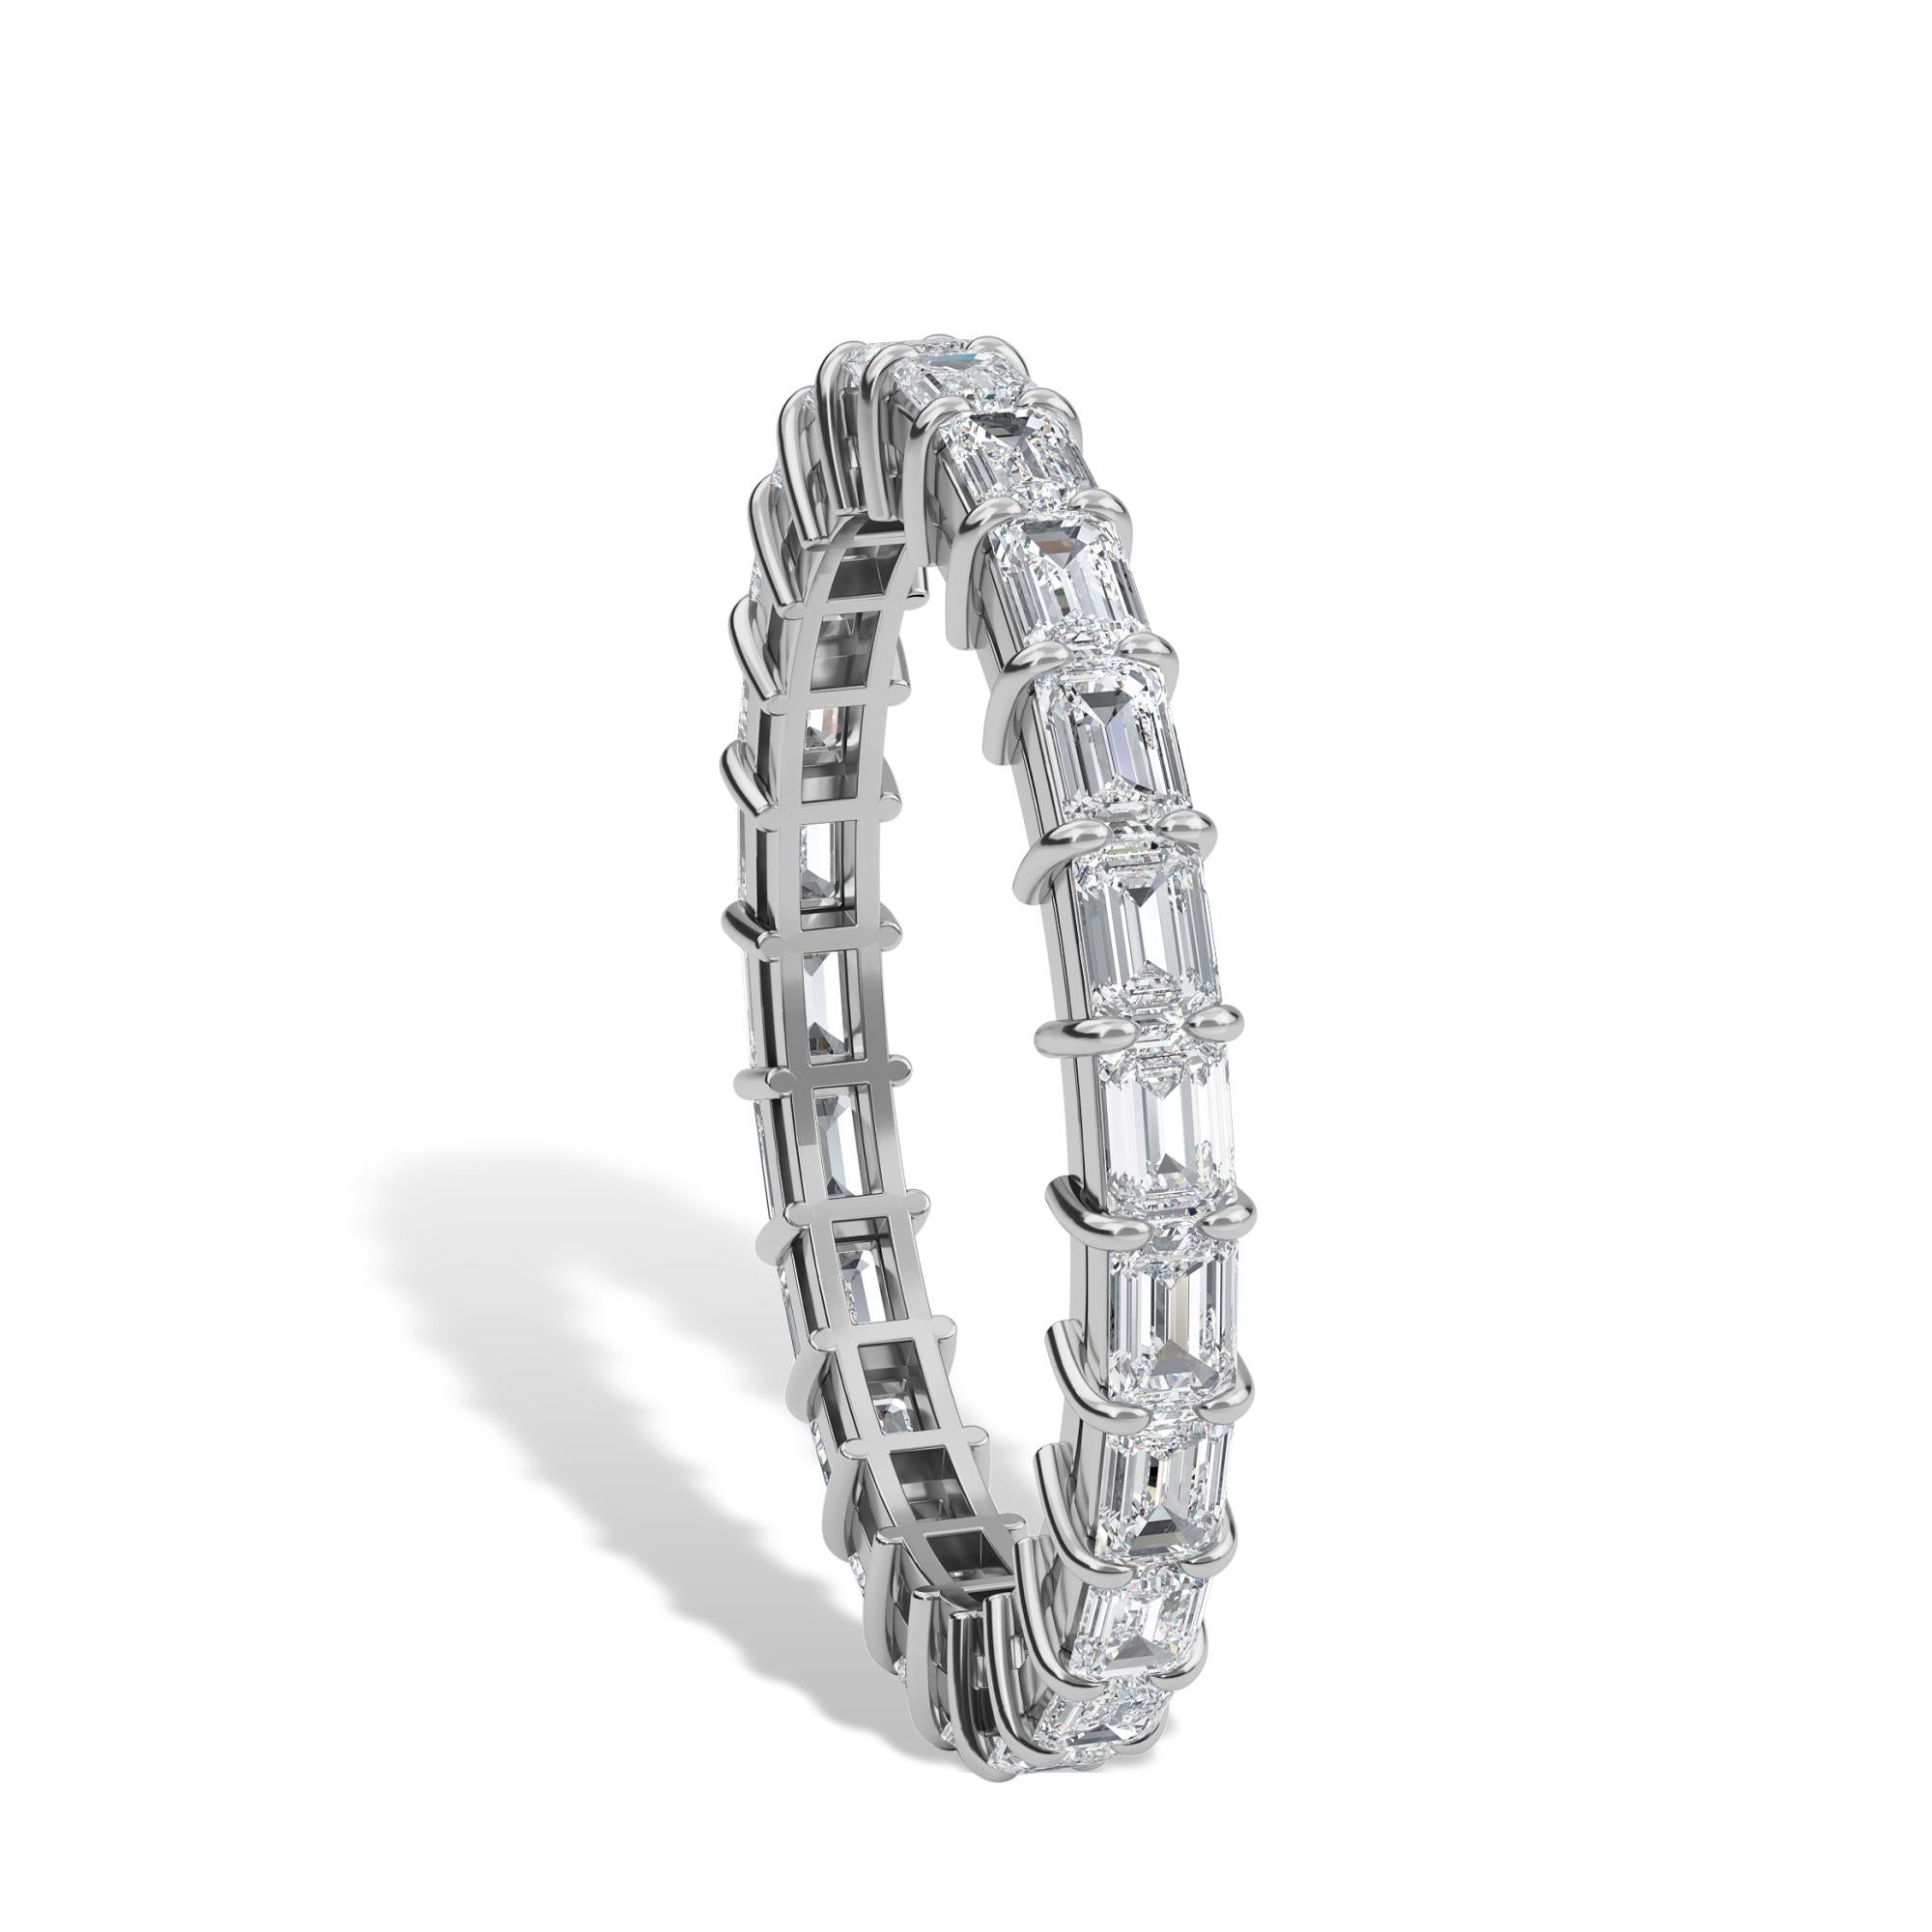 This ring has Emerald cut diamonds that are set horizontal. 
The ring has 24 diamonds with a total carat weight of 1.34.
The diamonds are F Color VS Clarity. The ring is a finger size 6.25 and is set in platinum.
This ring is the perfect ring that